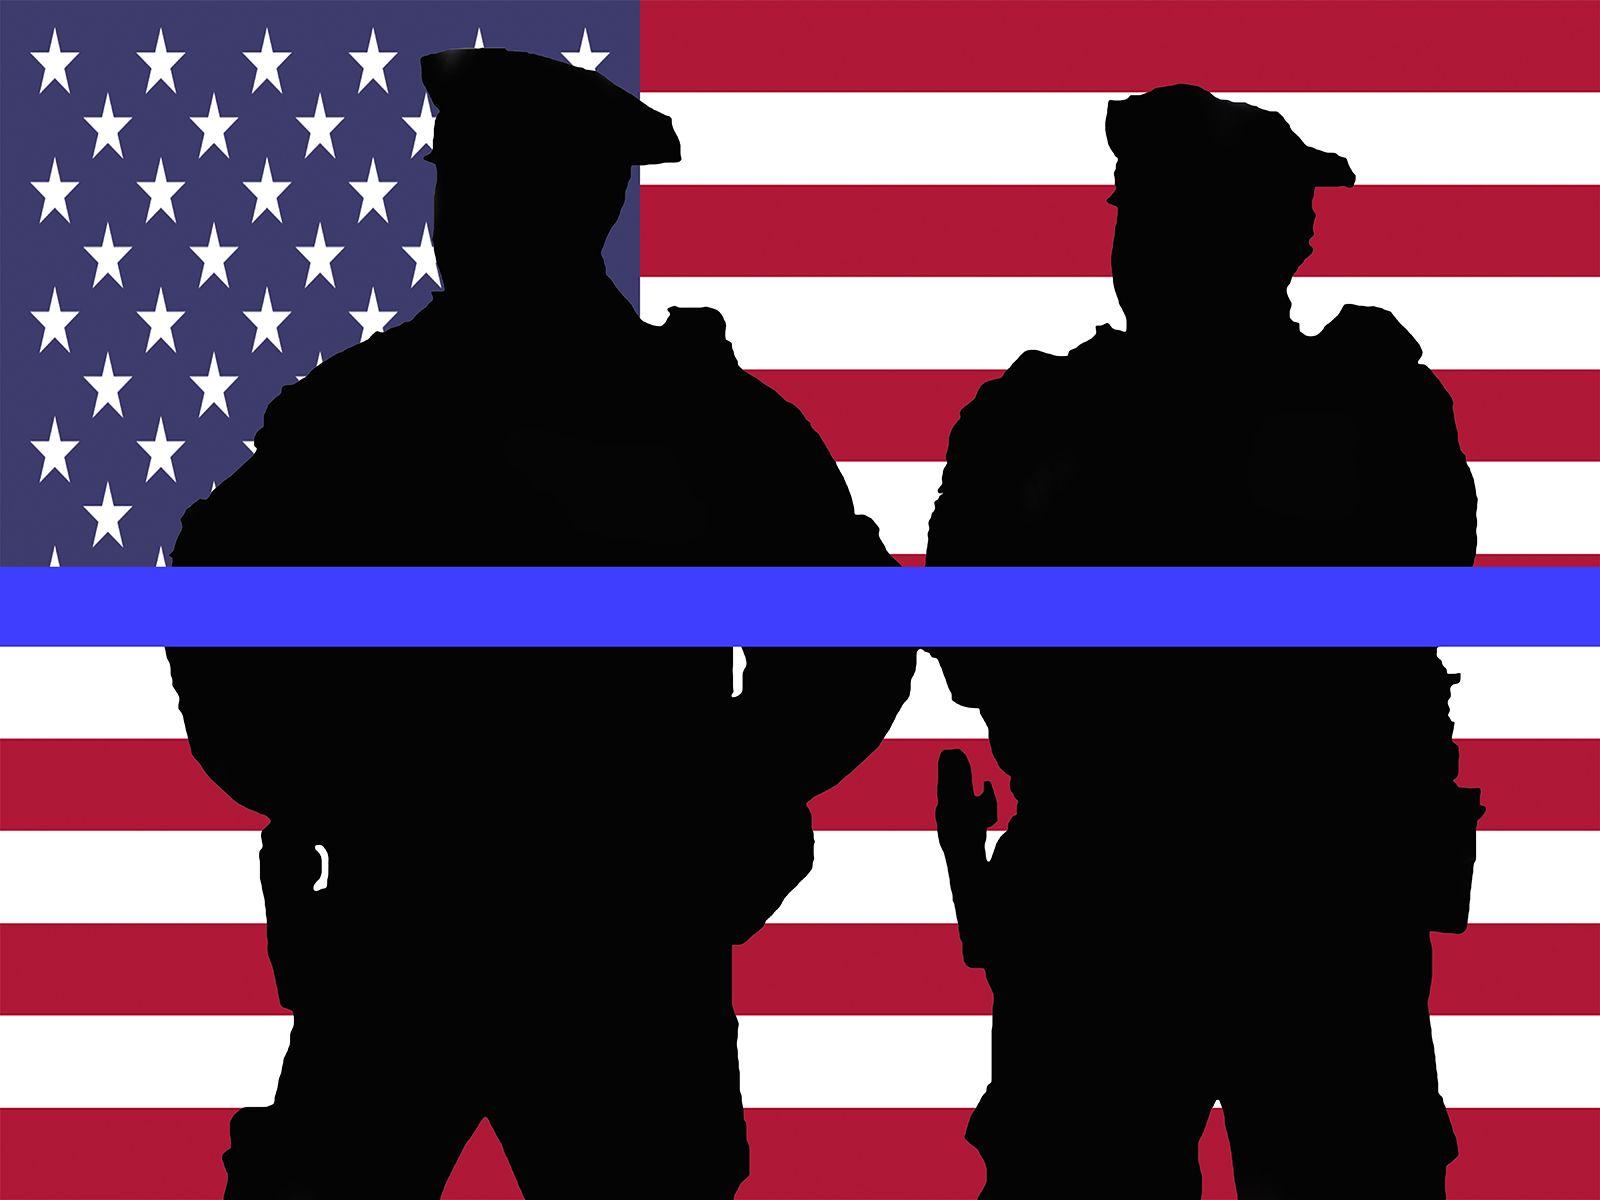 Thin Blue Line Poster